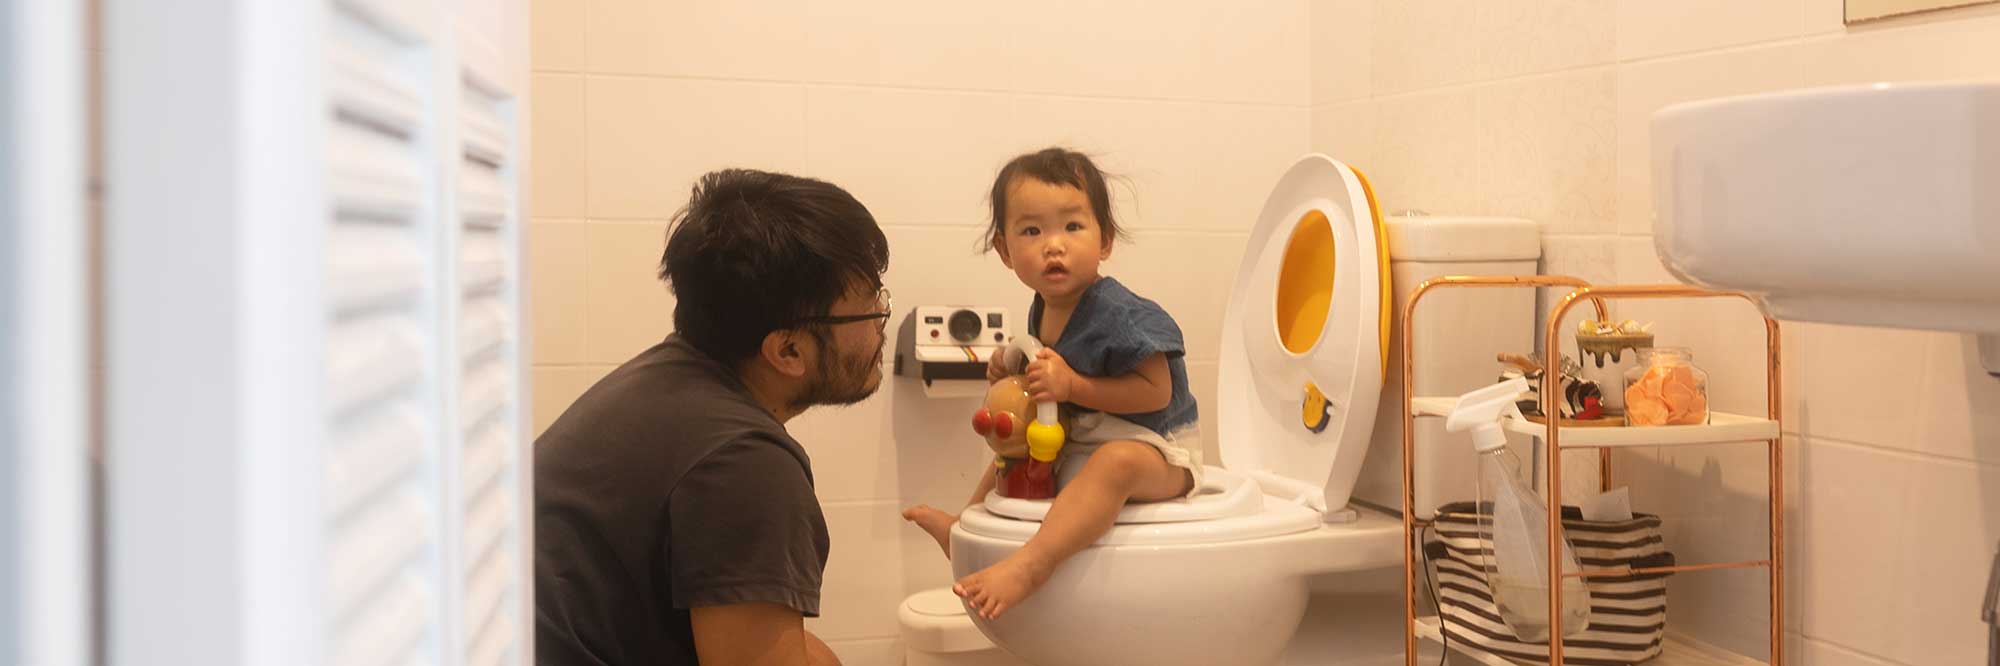 Potty training your toddler: when to start and what to expect!